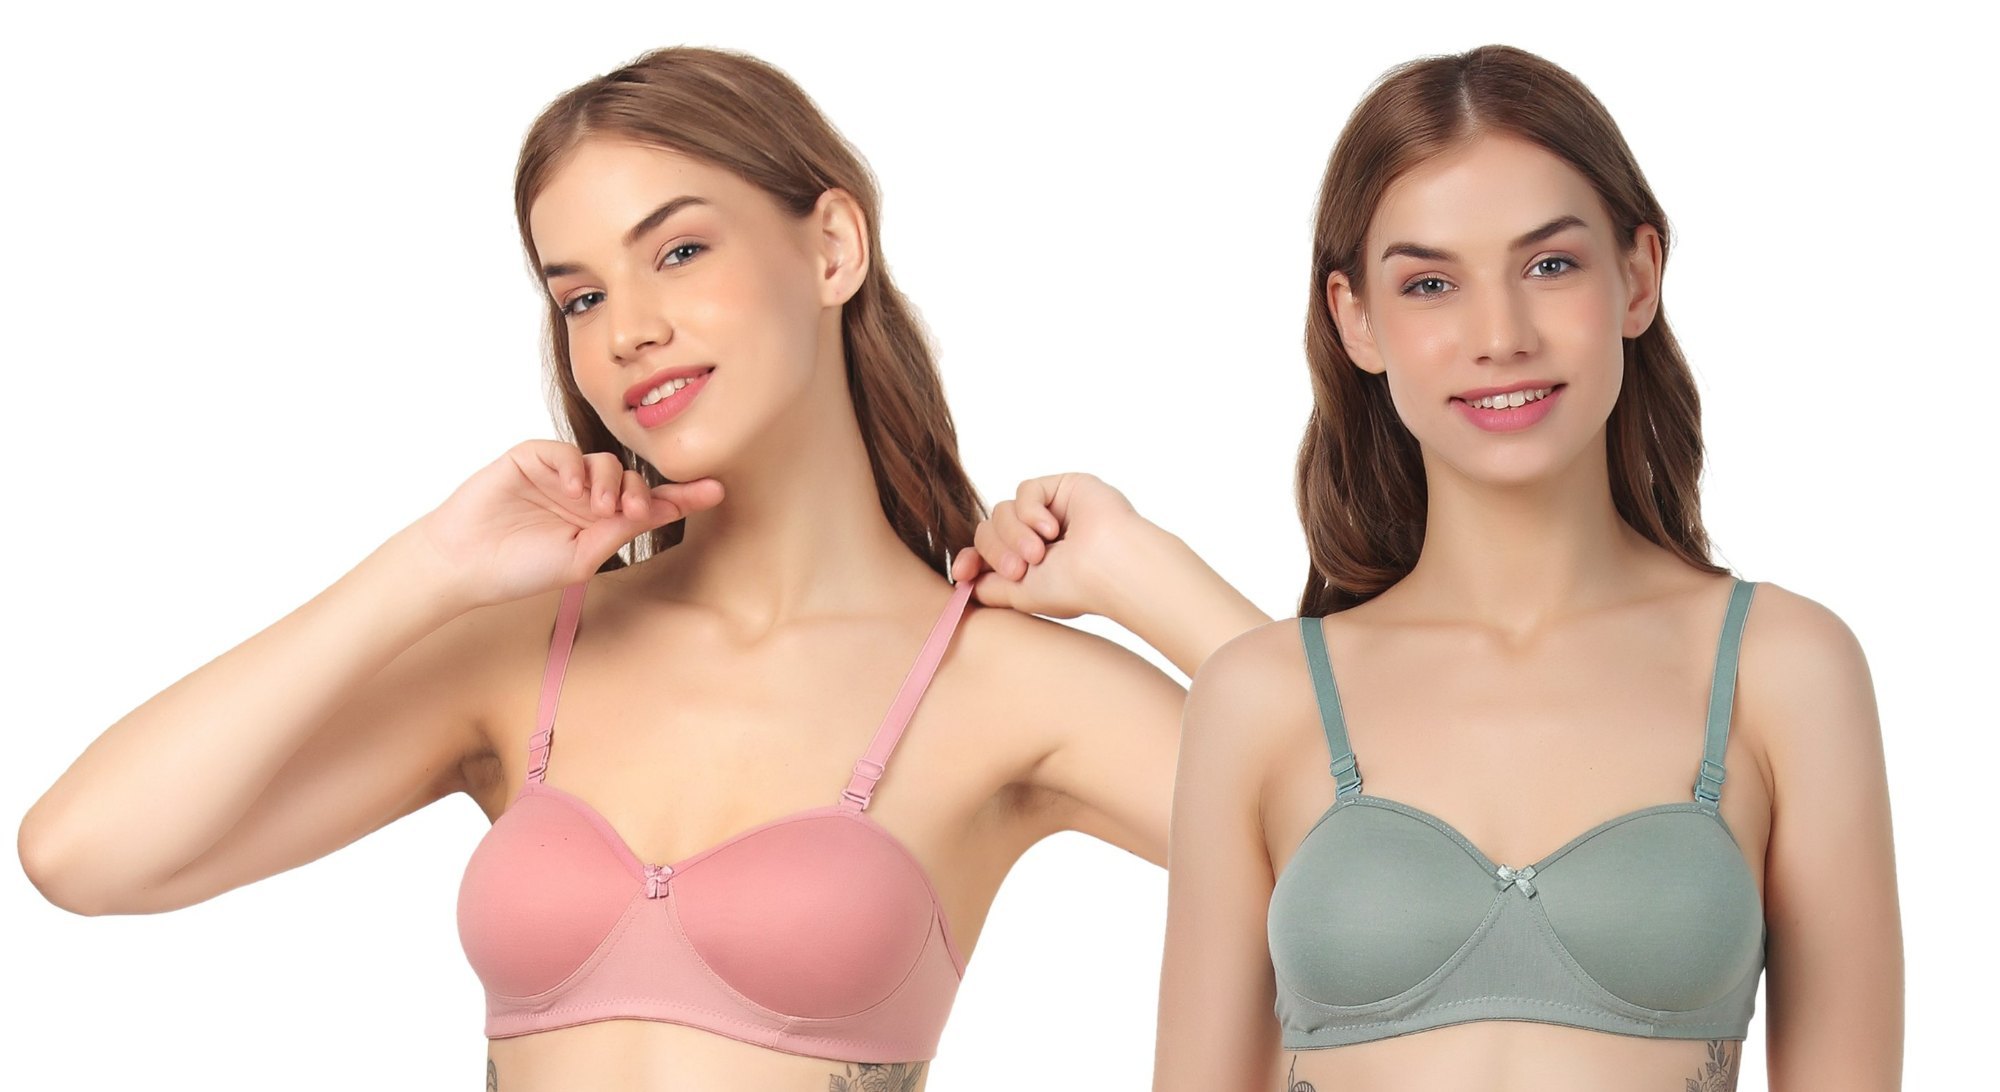 dave daoud recommends girls in half cup bras pic